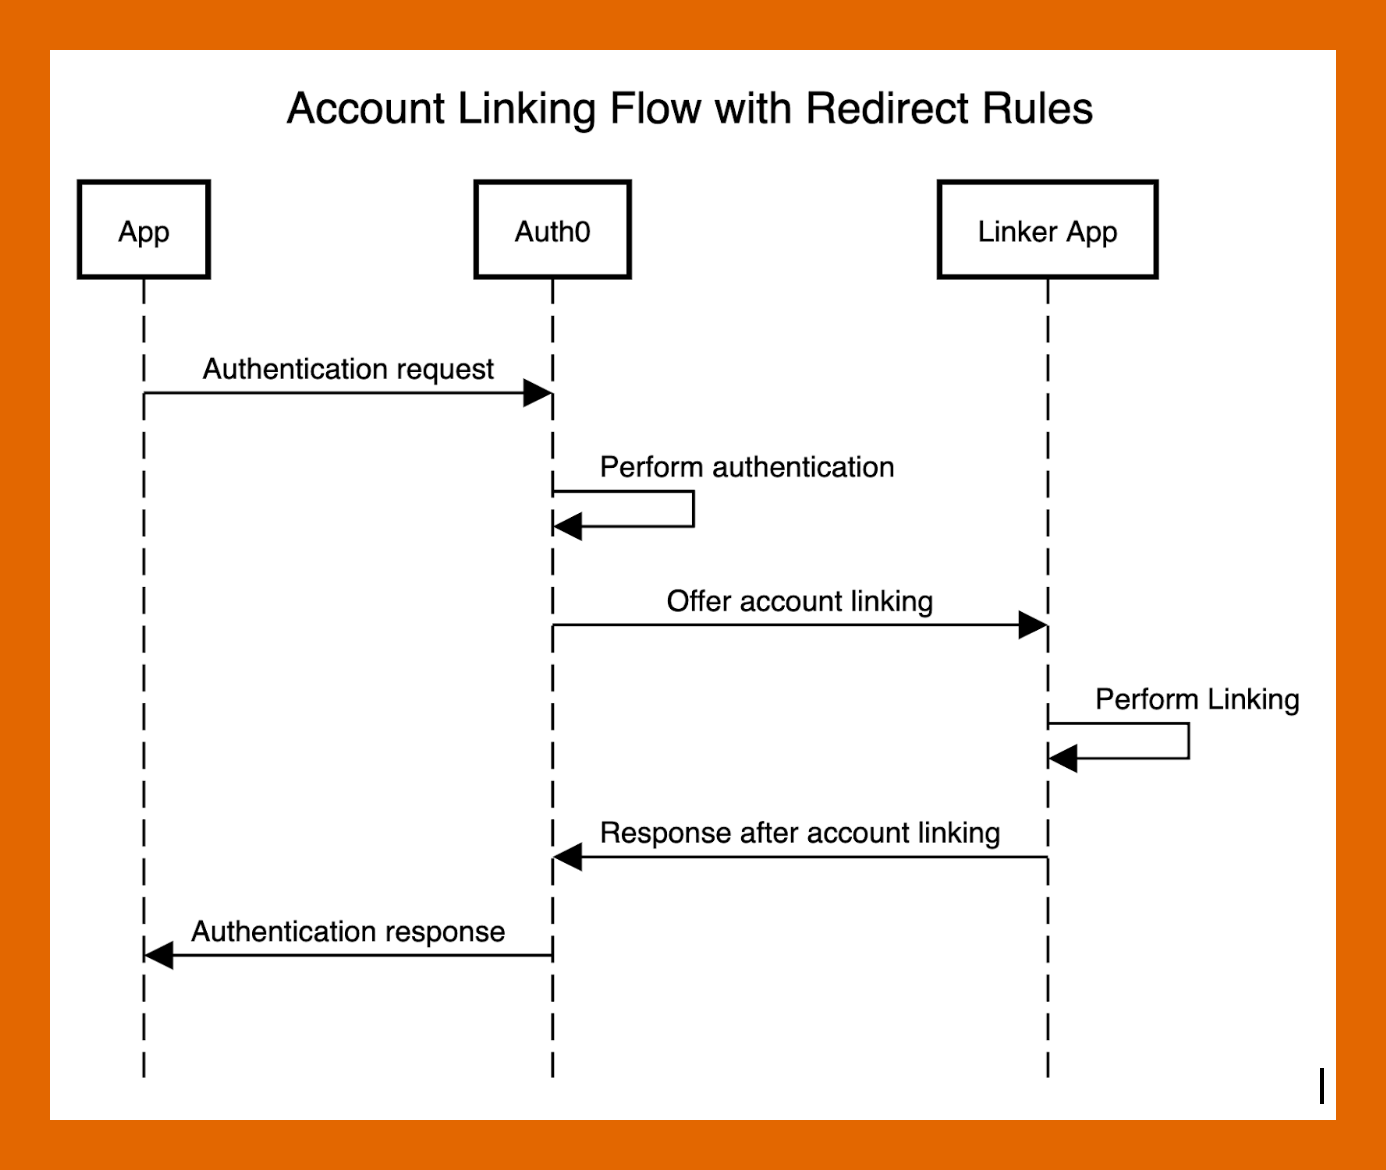 Account Linking Flow with Redirect Rules